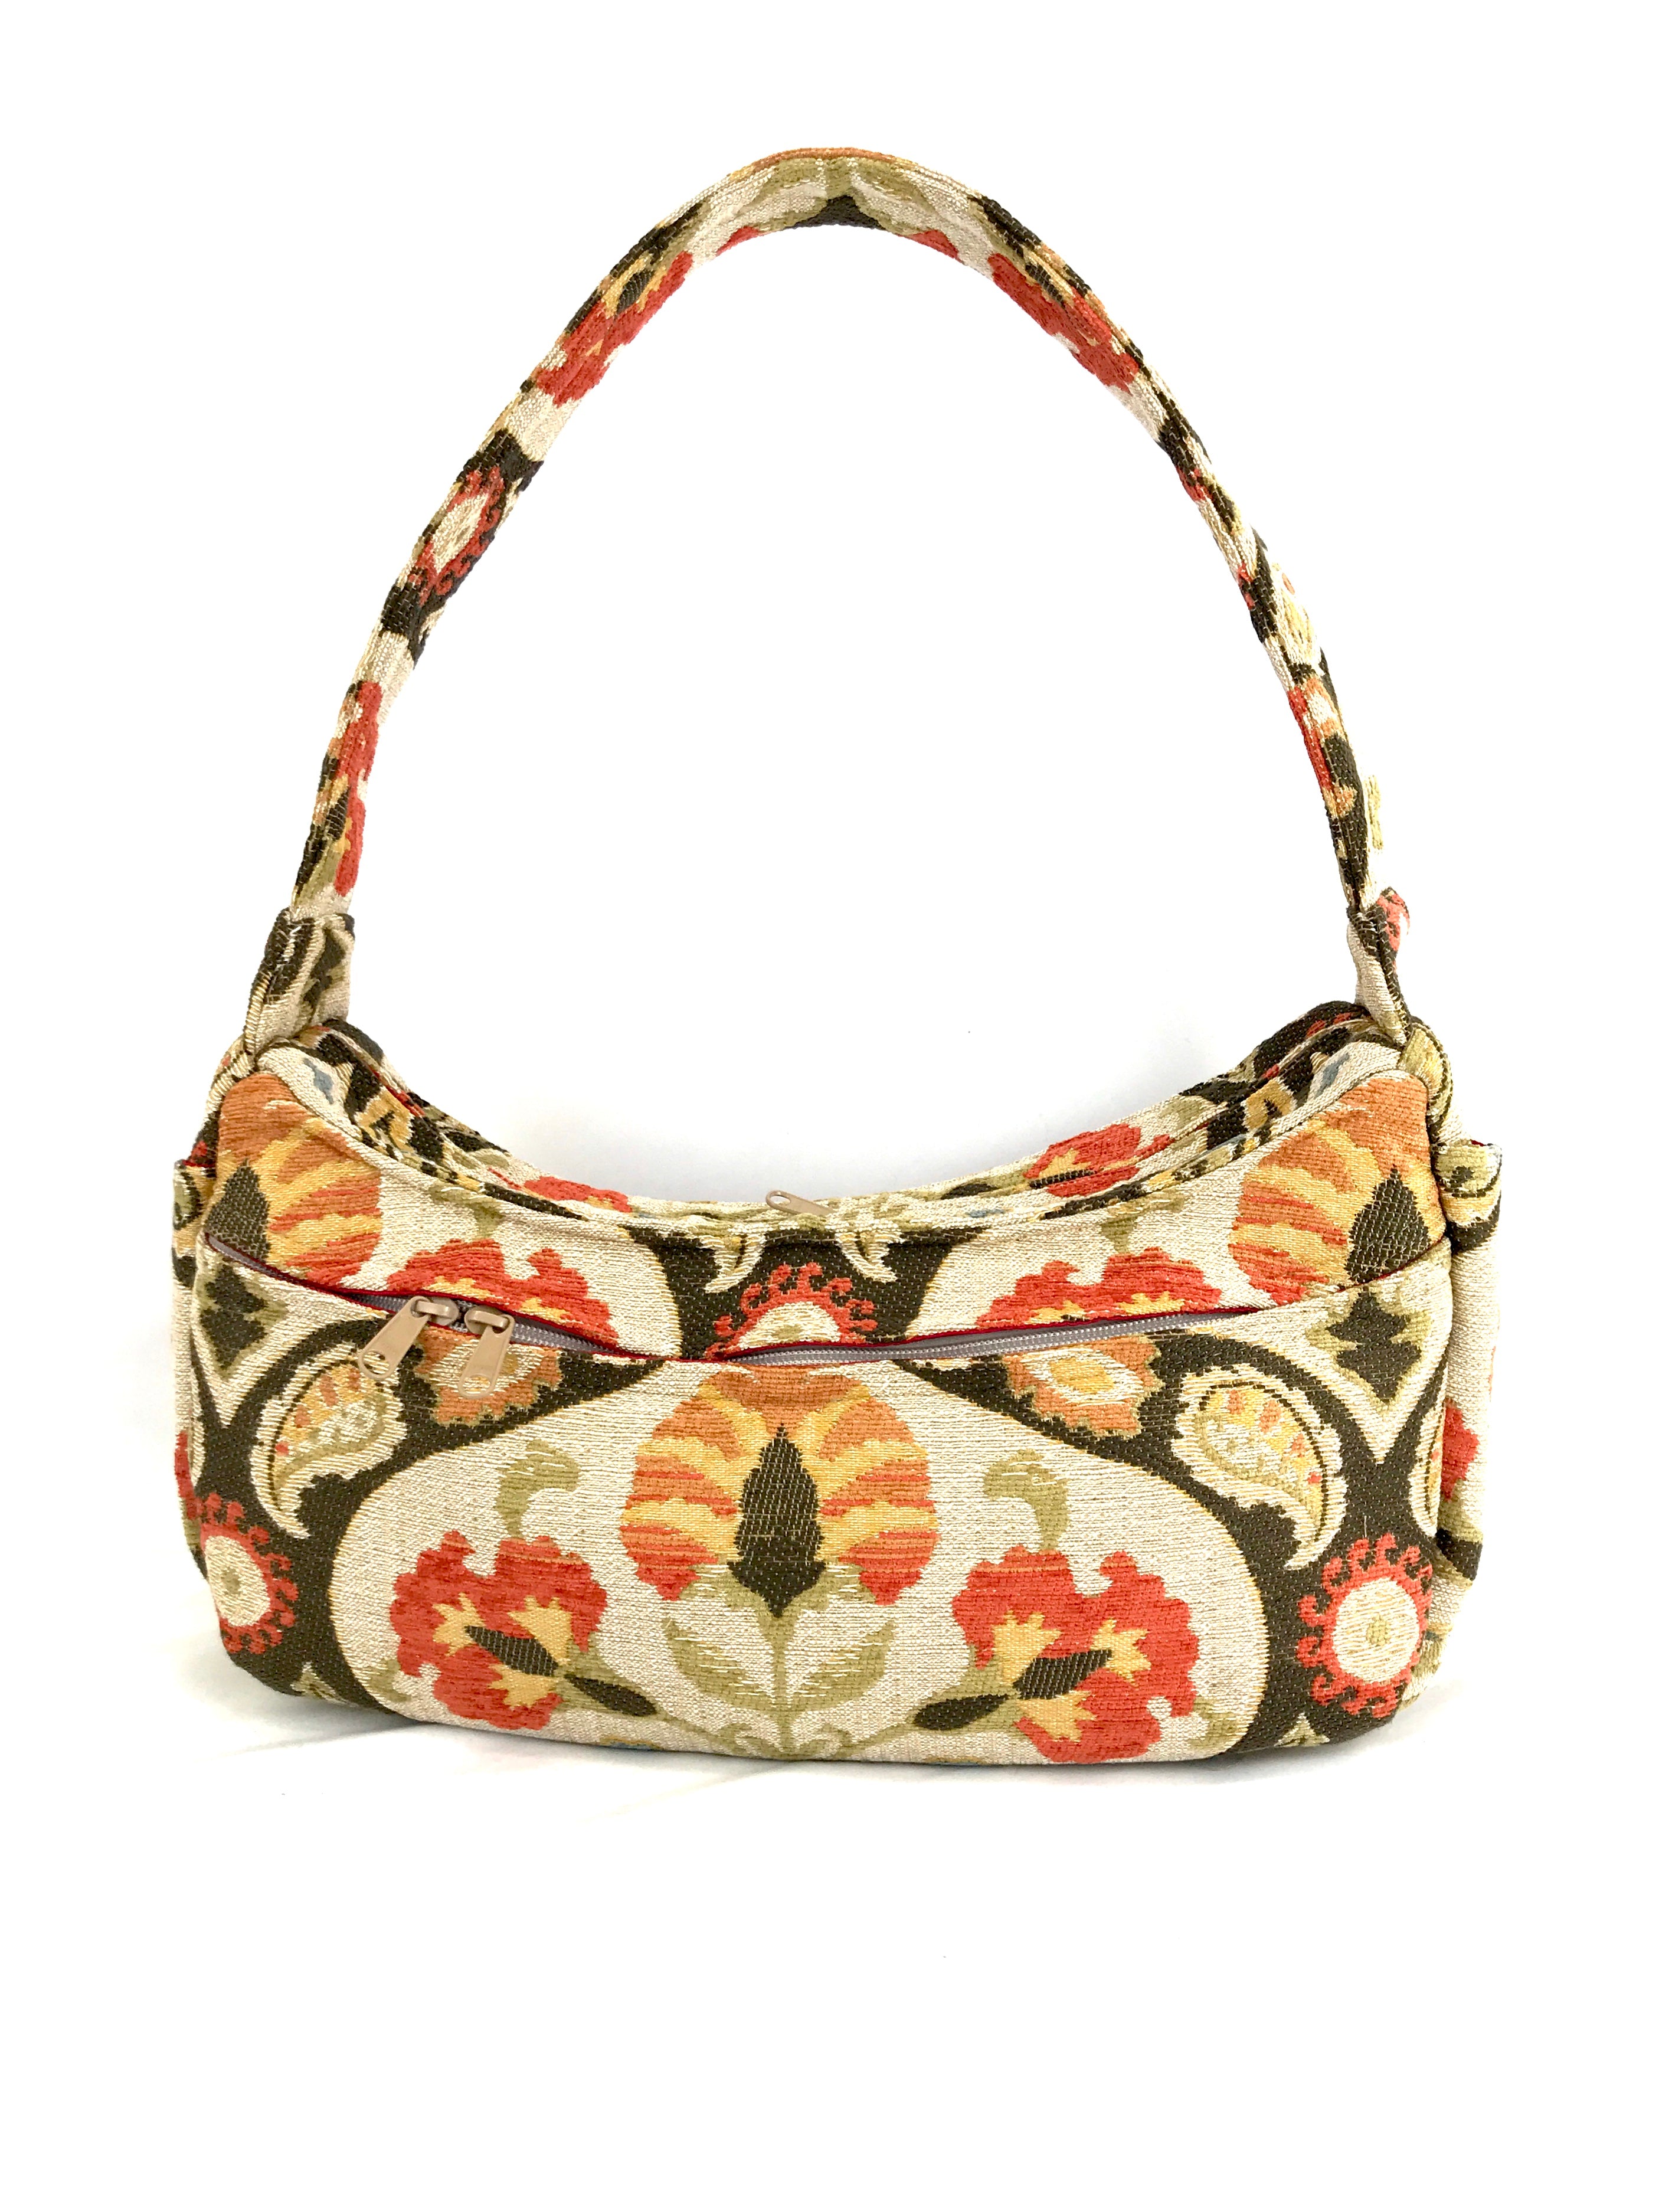 Boat Bag, Large, in Ivory and Coral Floral